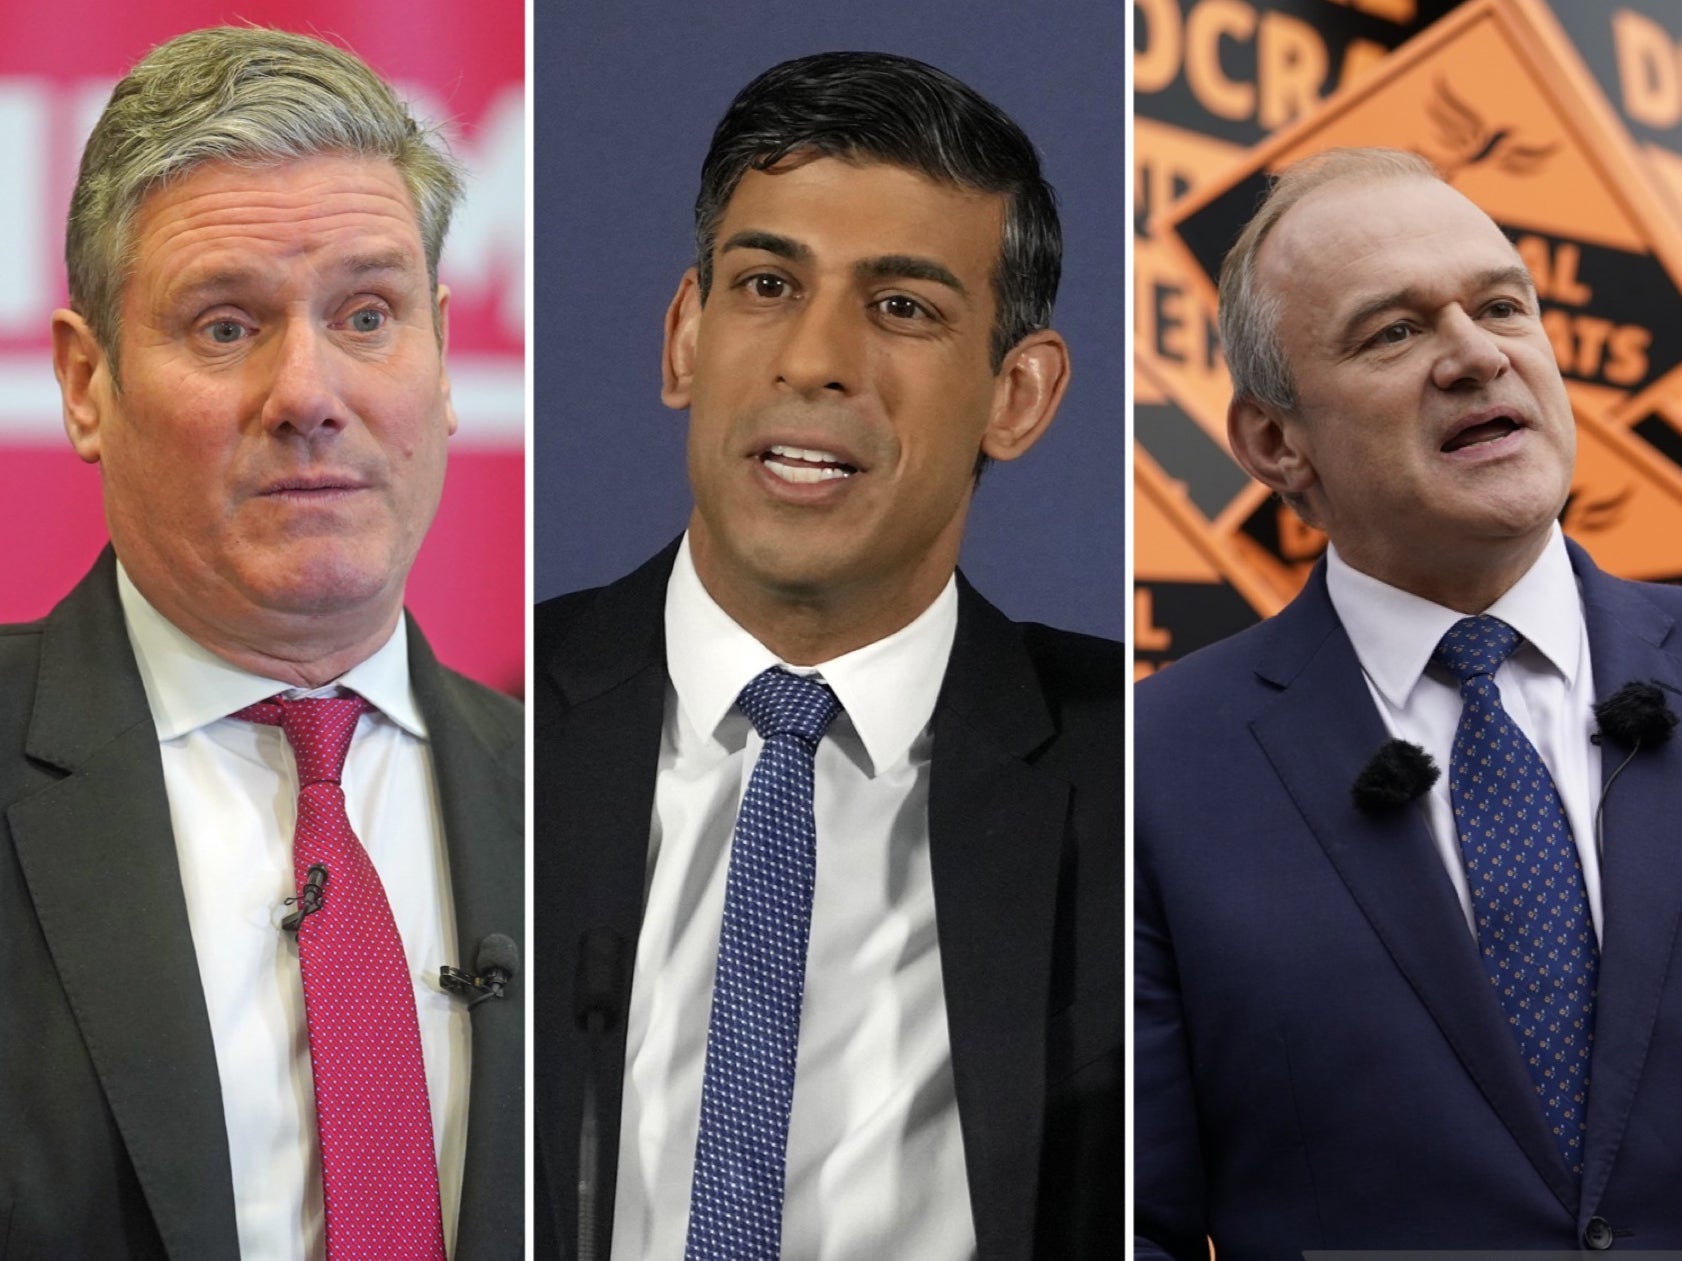 <p>Party leaders Keir Starmer, Rishi Sunak and Ed Davey</p>